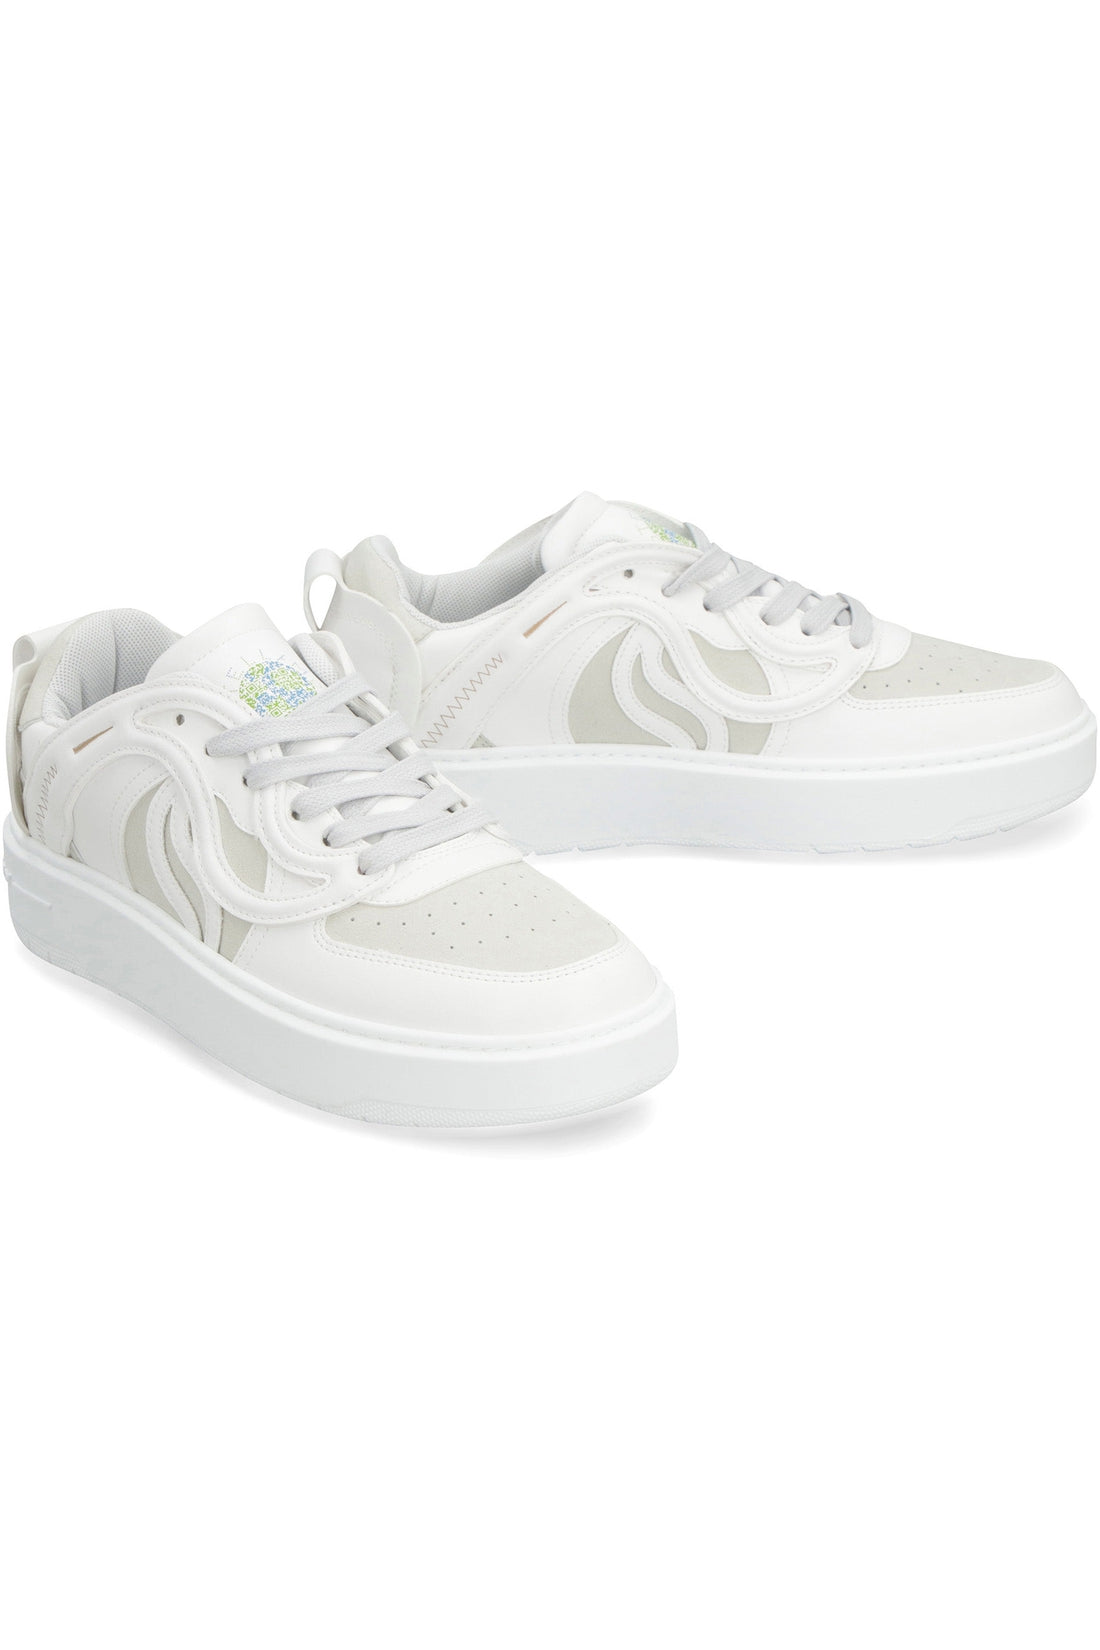 Stella McCartney-OUTLET-SALE-S Wave 1 low-top sneakers-ARCHIVIST